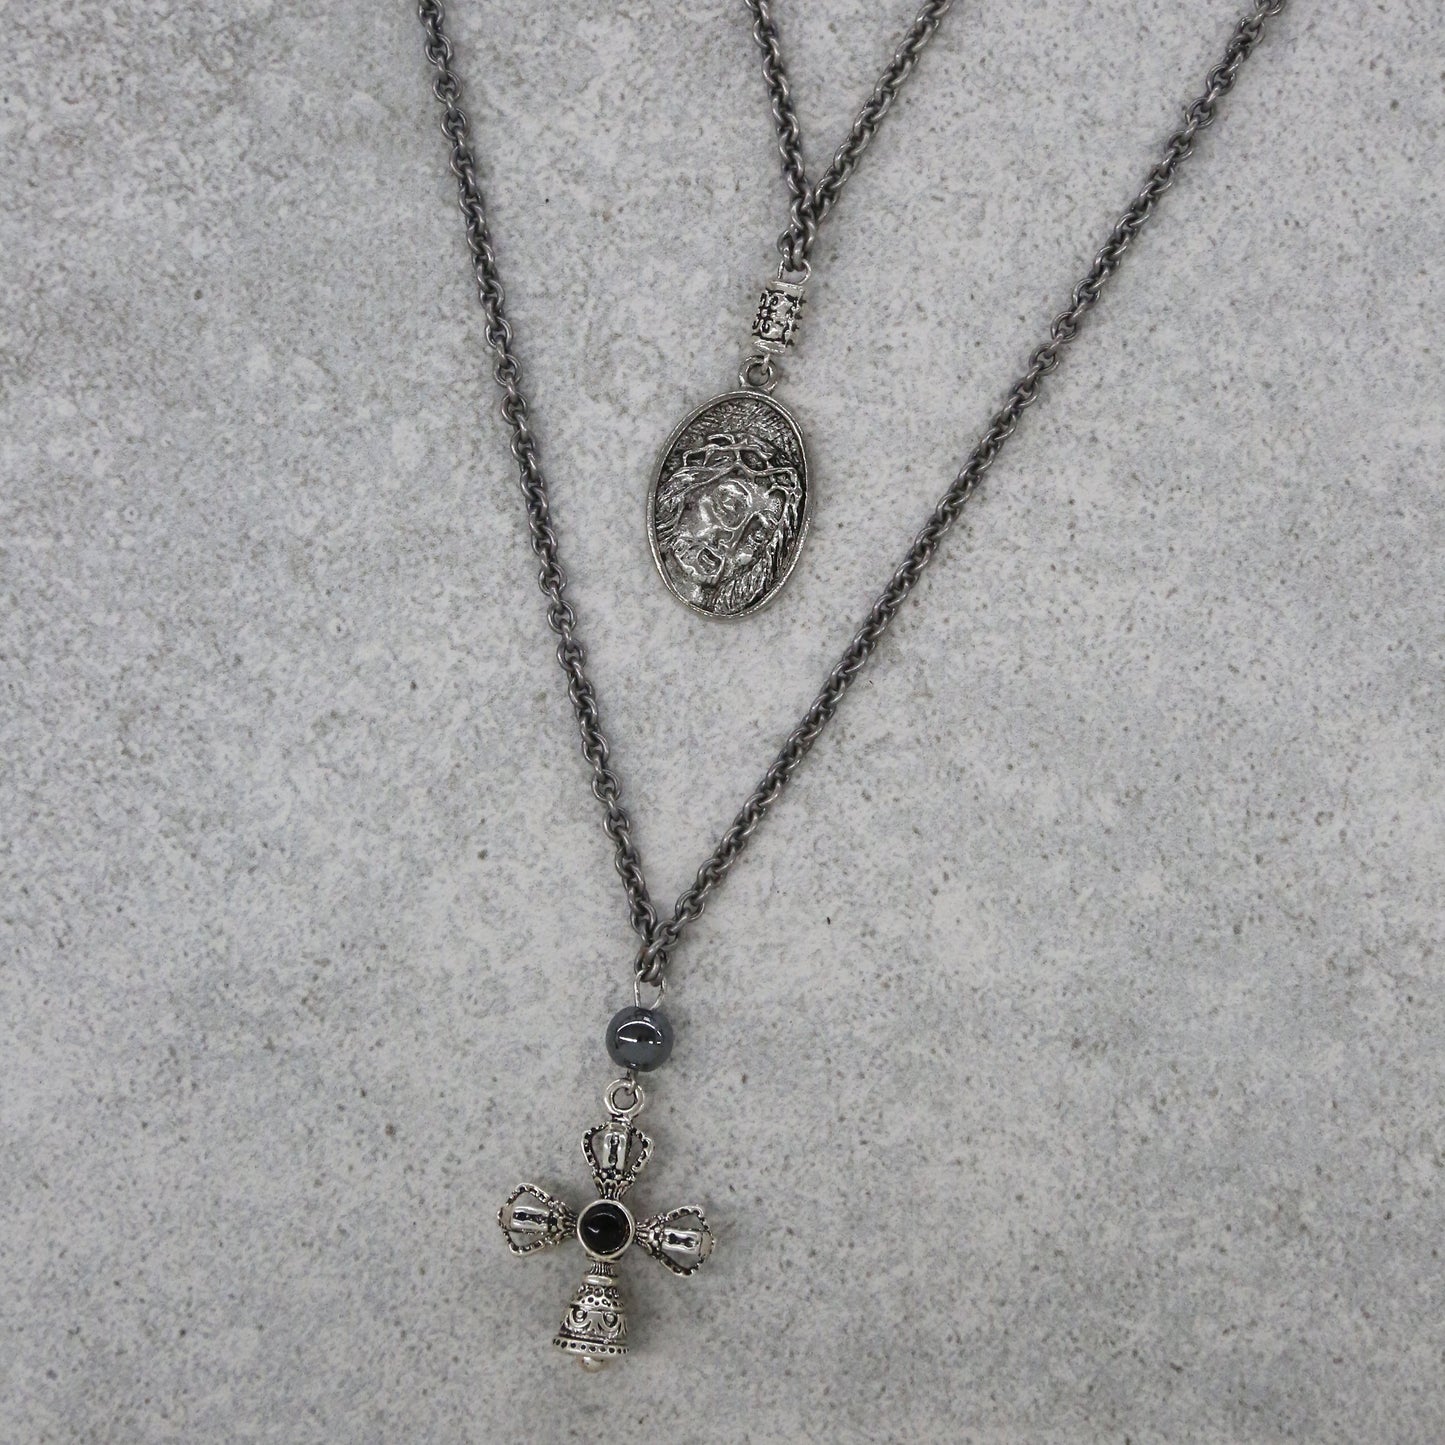 Cross and Holy Pendant Layered Necklace Set in Silver Ox